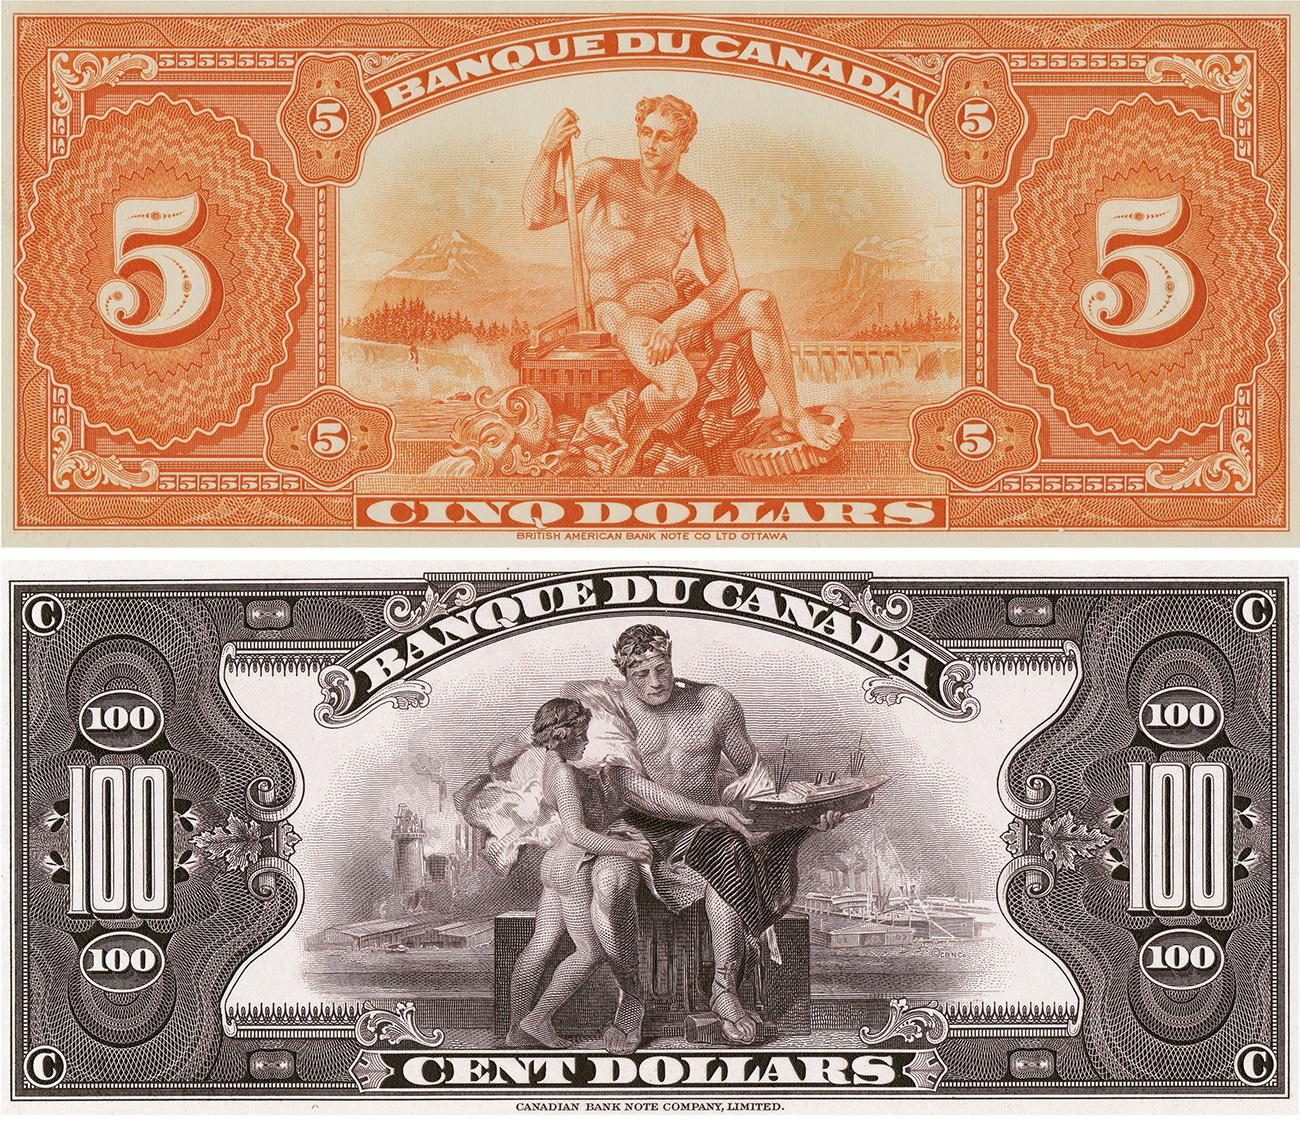 Two bank note design tests, one with a man in front of a hydroelectric dam, the other with a man and boy in an industrial landscape.